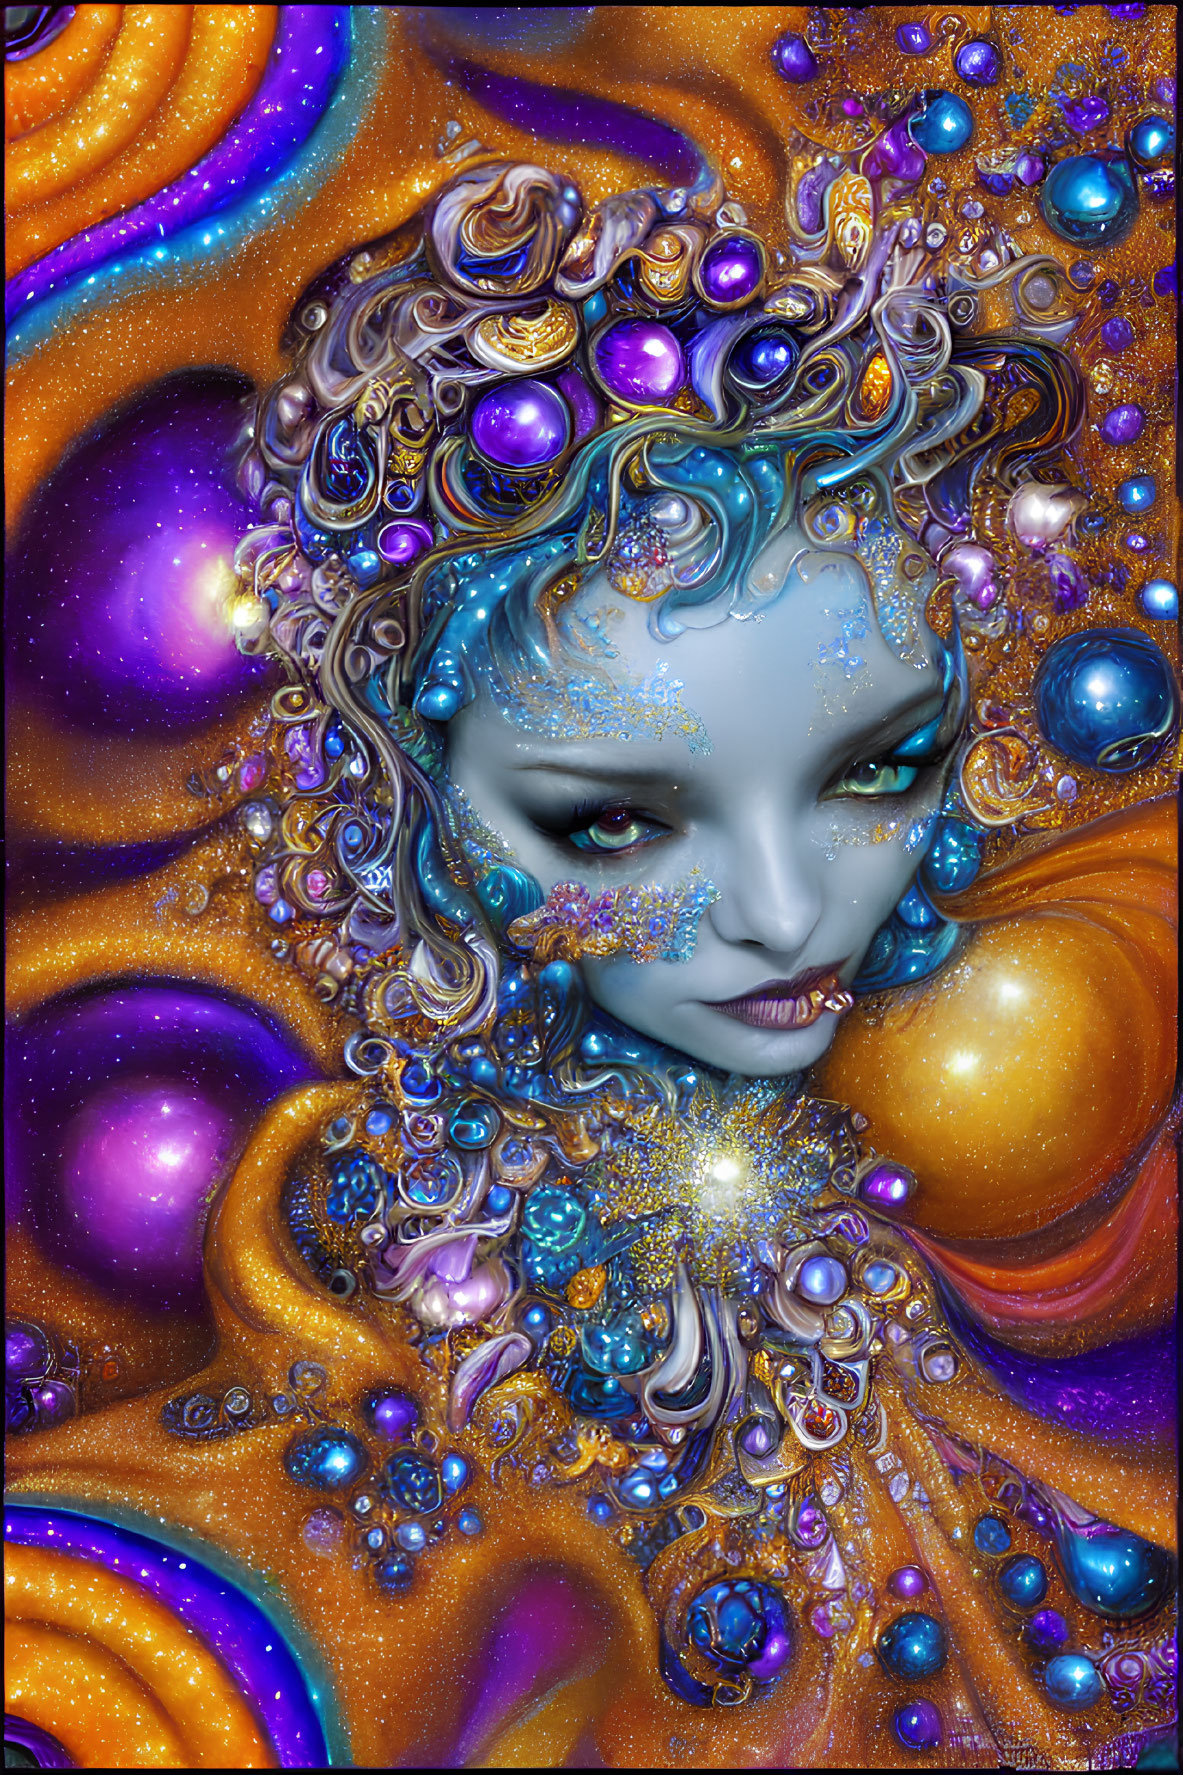 Fantasy Artwork: Blue-Skinned Character with Gold and Purple Patterns